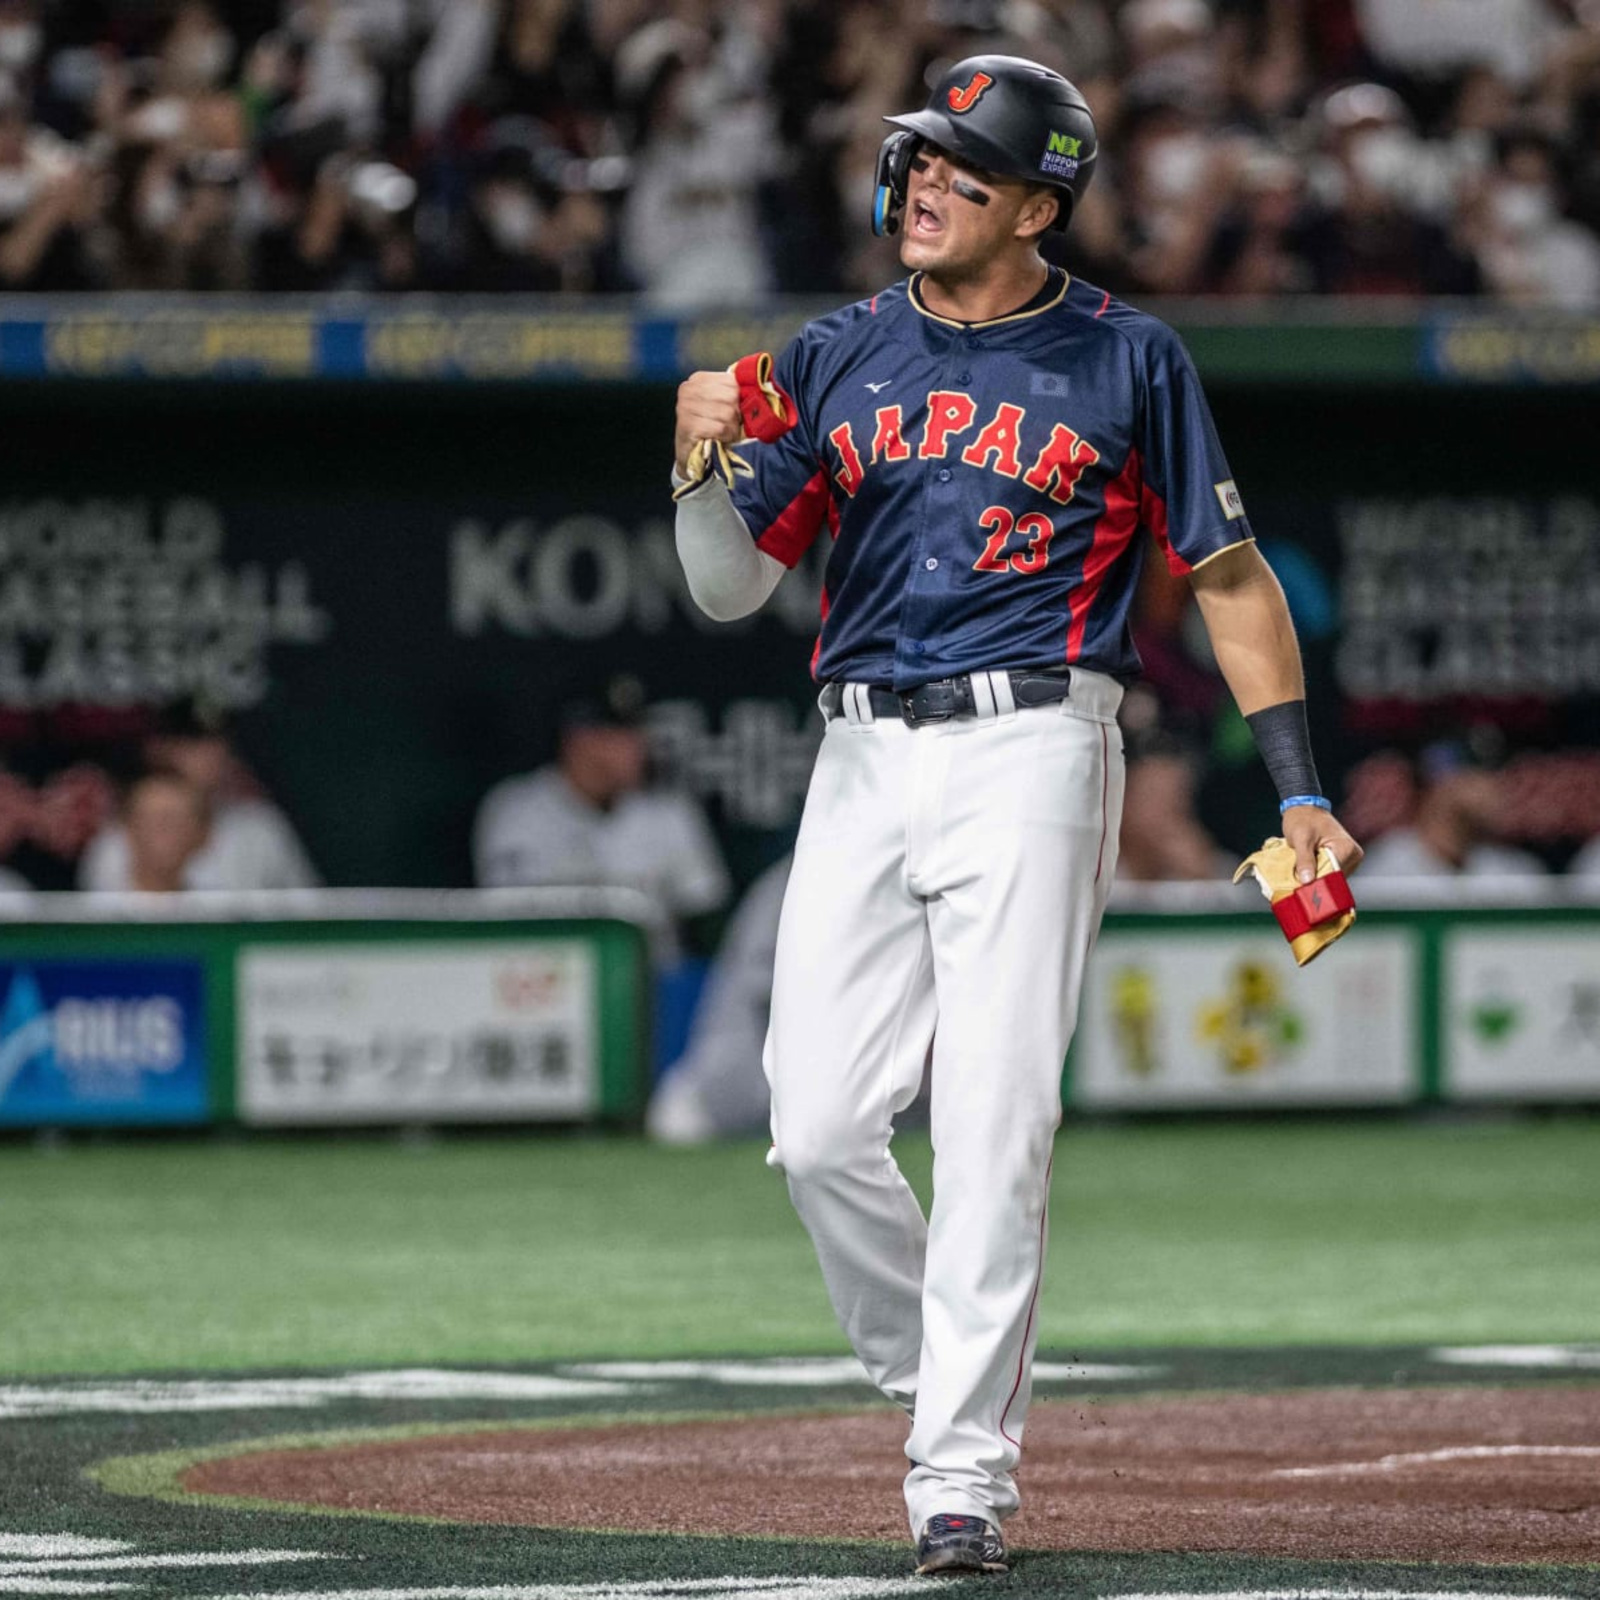 Baseball: Shohei Ohtani expresses readiness to play for Japan at WBC